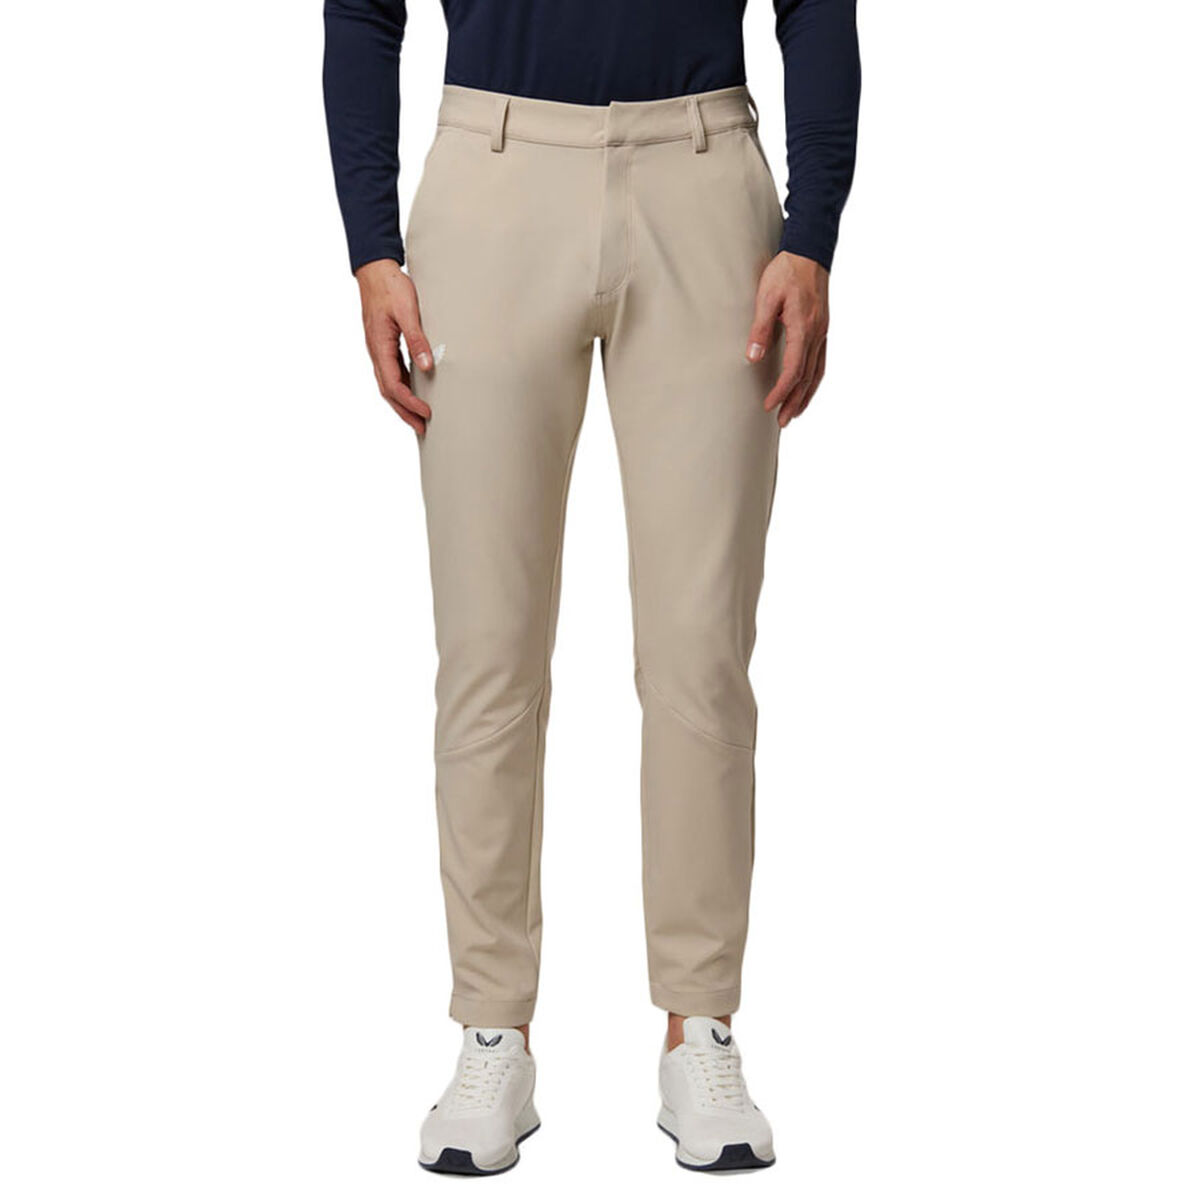 Castore Mens Beige Lightweight Performance Chino Golf Trousers, Size: Large| American Golf